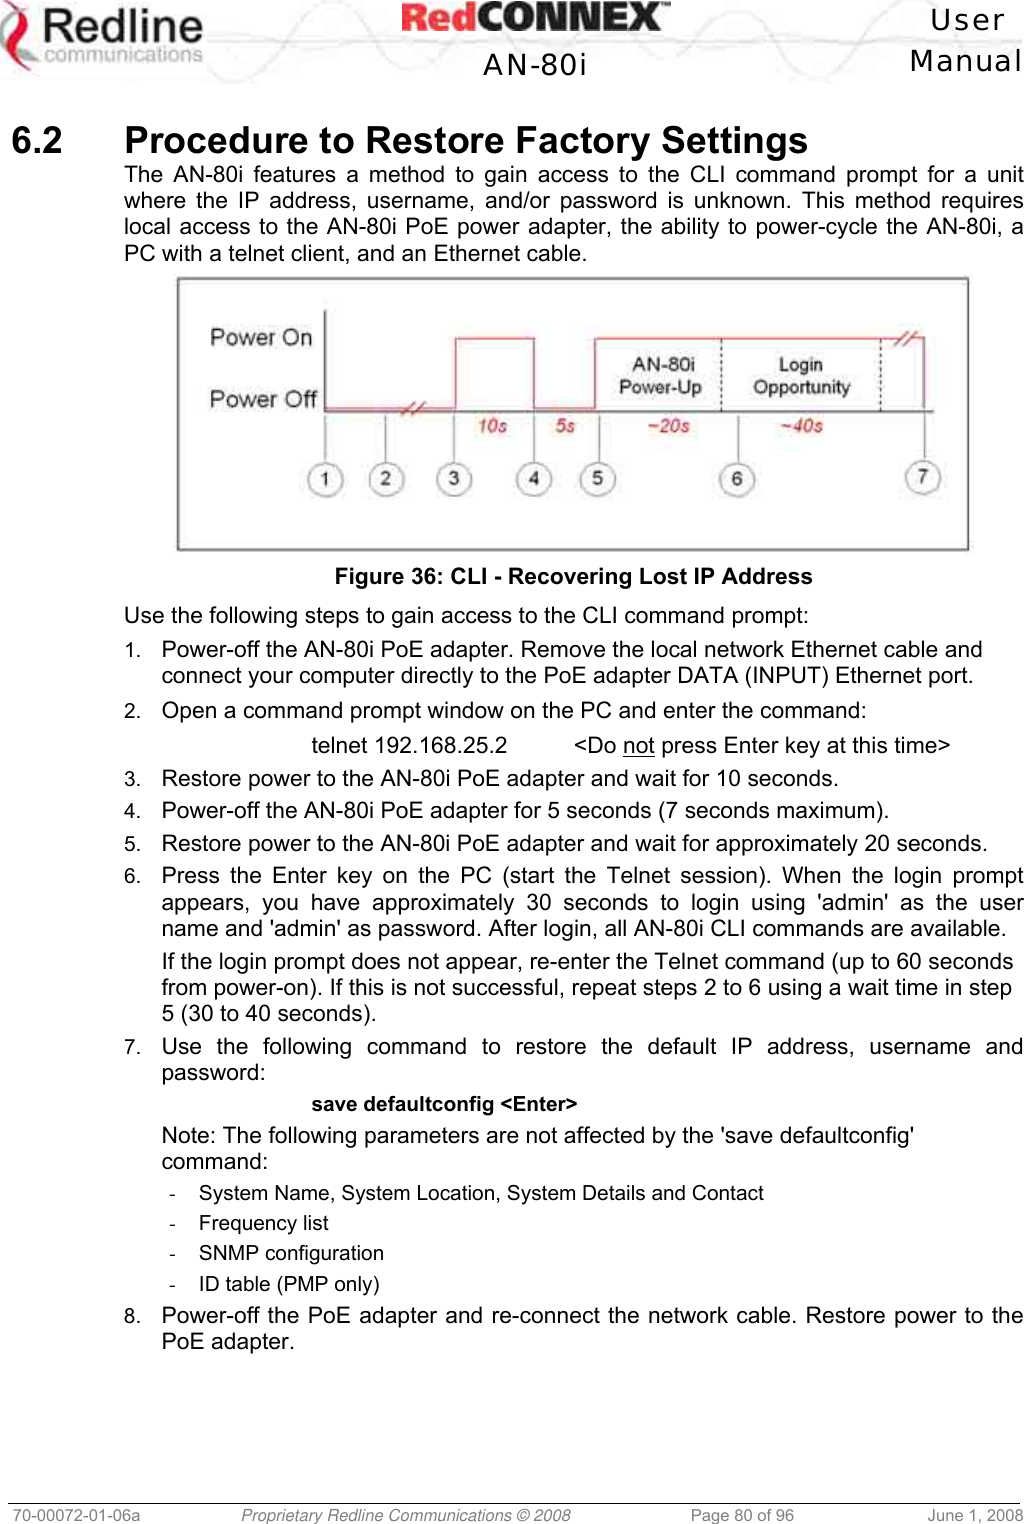   User  AN-80i Manual  70-00072-01-06a  Proprietary Redline Communications © 2008  Page 80 of 96  June 1, 2008  6.2  Procedure to Restore Factory Settings The AN-80i features a method to gain access to the CLI command prompt for a unit where the IP address, username, and/or password is unknown. This method requires local access to the AN-80i PoE power adapter, the ability to power-cycle the AN-80i, a PC with a telnet client, and an Ethernet cable.   Figure 36: CLI - Recovering Lost IP Address Use the following steps to gain access to the CLI command prompt: 1.  Power-off the AN-80i PoE adapter. Remove the local network Ethernet cable and connect your computer directly to the PoE adapter DATA (INPUT) Ethernet port. 2.  Open a command prompt window on the PC and enter the command:   telnet 192.168.25.2  &lt;Do not press Enter key at this time&gt; 3.  Restore power to the AN-80i PoE adapter and wait for 10 seconds. 4.  Power-off the AN-80i PoE adapter for 5 seconds (7 seconds maximum). 5.  Restore power to the AN-80i PoE adapter and wait for approximately 20 seconds. 6.  Press the Enter key on the PC (start the Telnet session). When the login prompt appears, you have approximately 30 seconds to login using &apos;admin&apos; as the user name and &apos;admin&apos; as password. After login, all AN-80i CLI commands are available. If the login prompt does not appear, re-enter the Telnet command (up to 60 seconds from power-on). If this is not successful, repeat steps 2 to 6 using a wait time in step 5 (30 to 40 seconds). 7.  Use the following command to restore the default IP address, username and password:   save defaultconfig &lt;Enter&gt; Note: The following parameters are not affected by the &apos;save defaultconfig&apos; command:  -  System Name, System Location, System Details and Contact -  Frequency list -  SNMP configuration -  ID table (PMP only) 8.  Power-off the PoE adapter and re-connect the network cable. Restore power to the PoE adapter.  